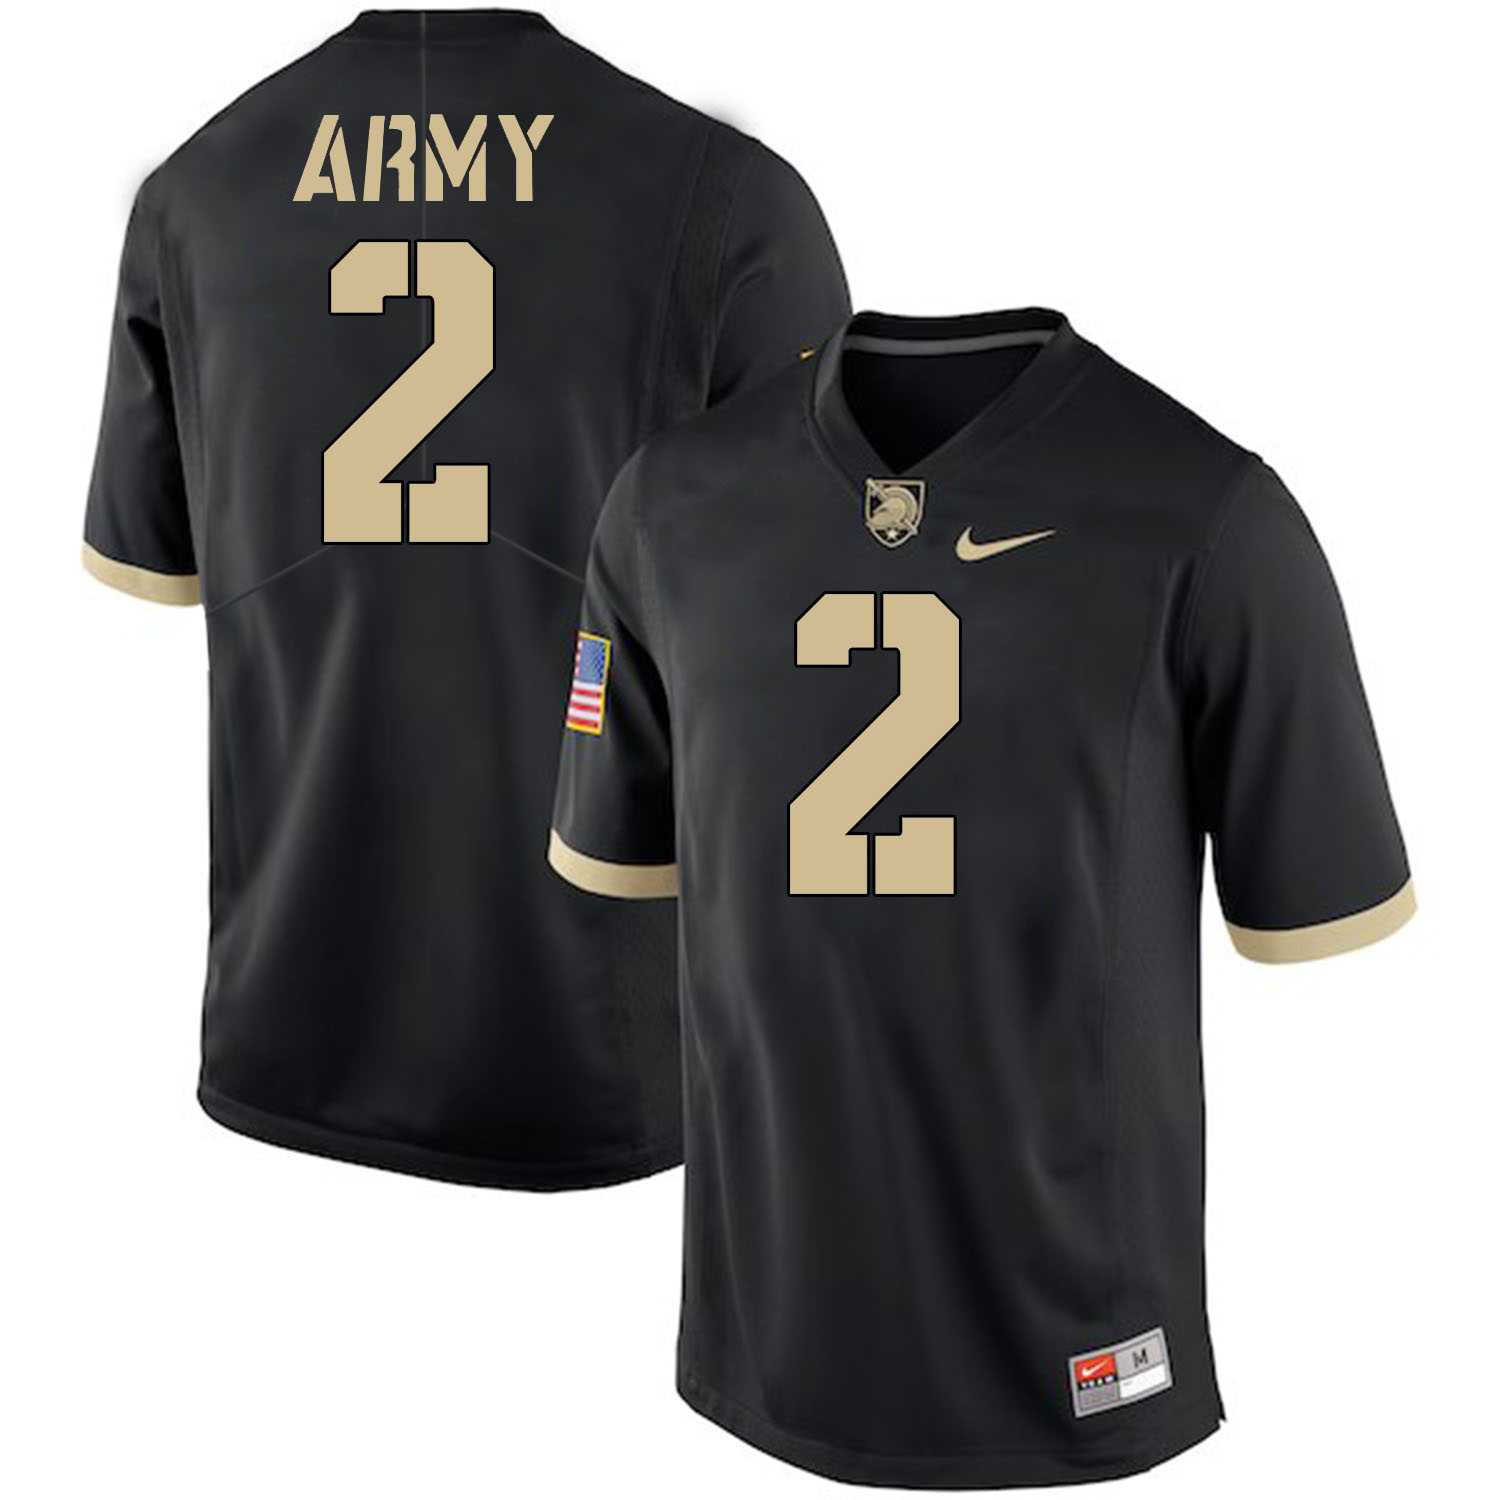 Army Black Knights #2 James Gibson Black College Football Jersey